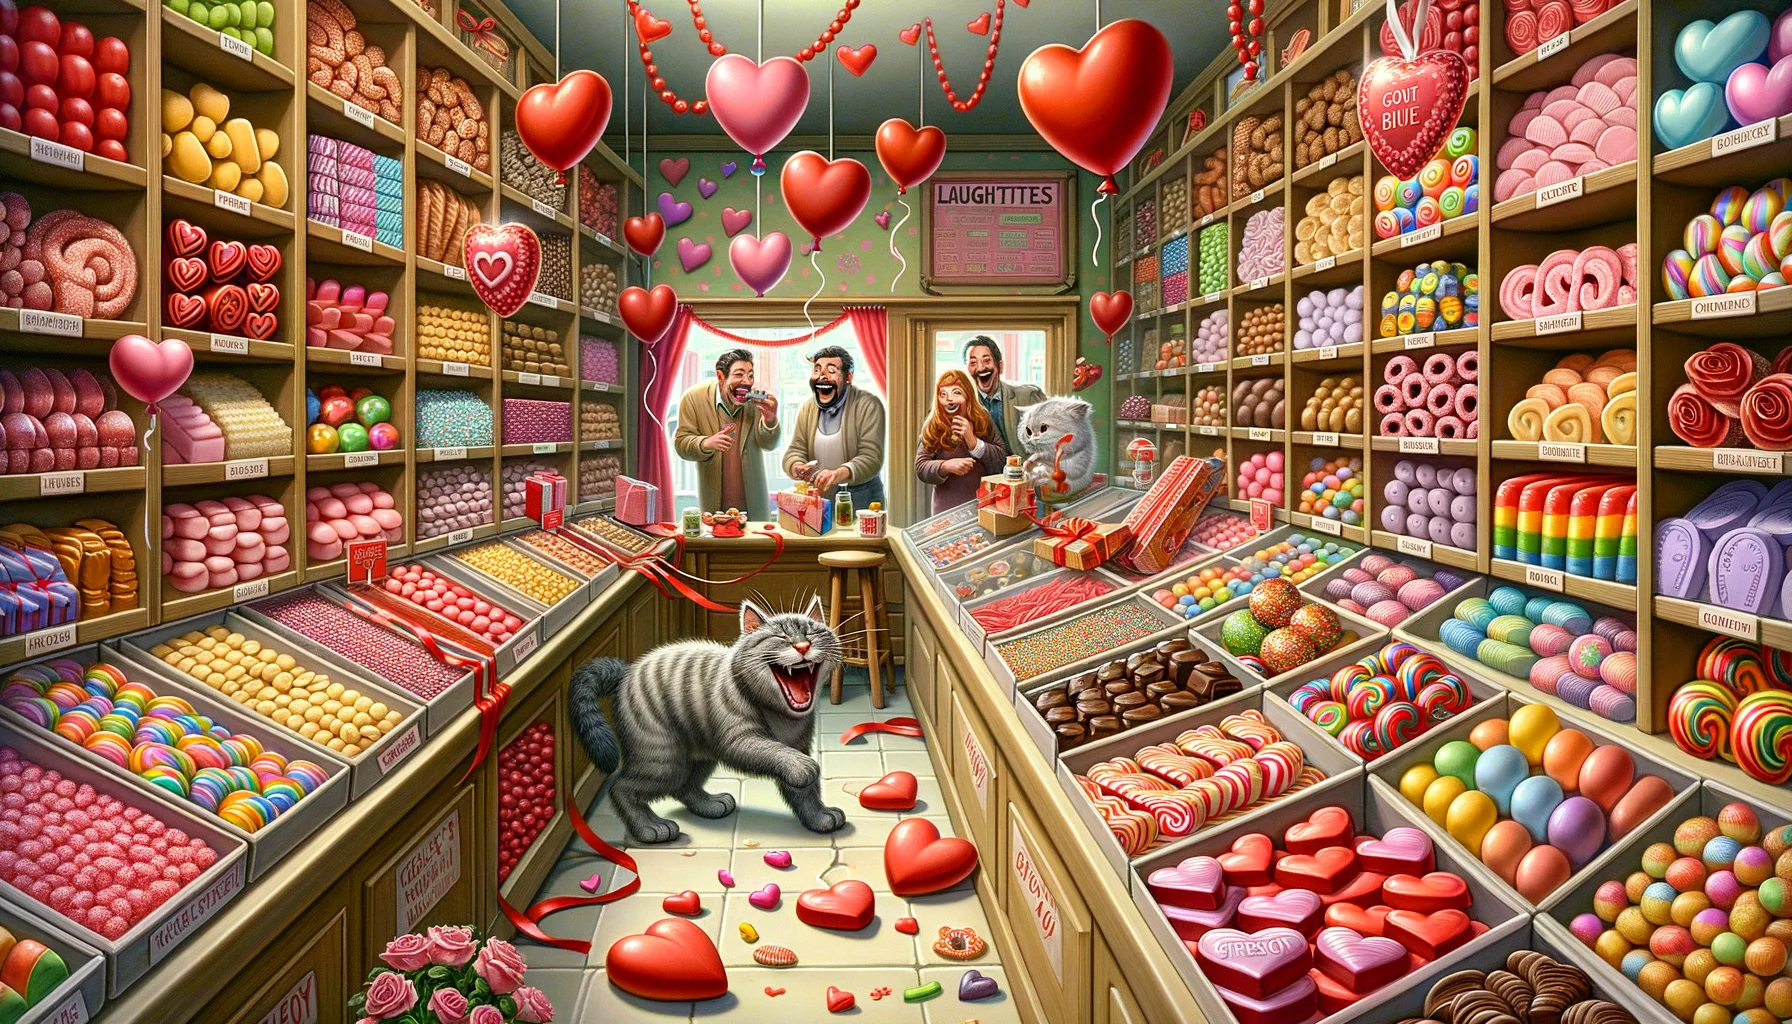 A humorous and realistic depiction of a perfect Valentine's Day scenario. A lively scene is unfolding in a cozy candy shop, with shelves lined with various heart-shaped sweets. These colorful sweets range from chocolates with cream fillings, gummies of all flavors, to delicious sugar cookies. Laughter bubbles from unseen customers provides a festive, good-humored backdrop. Additionally, a mischievous store cat playfully pokes at a red ribbon that has fallen from a package of the sweets. A series of colourful balloons float gently near the ceiling, adding further jovial elements to the scene.